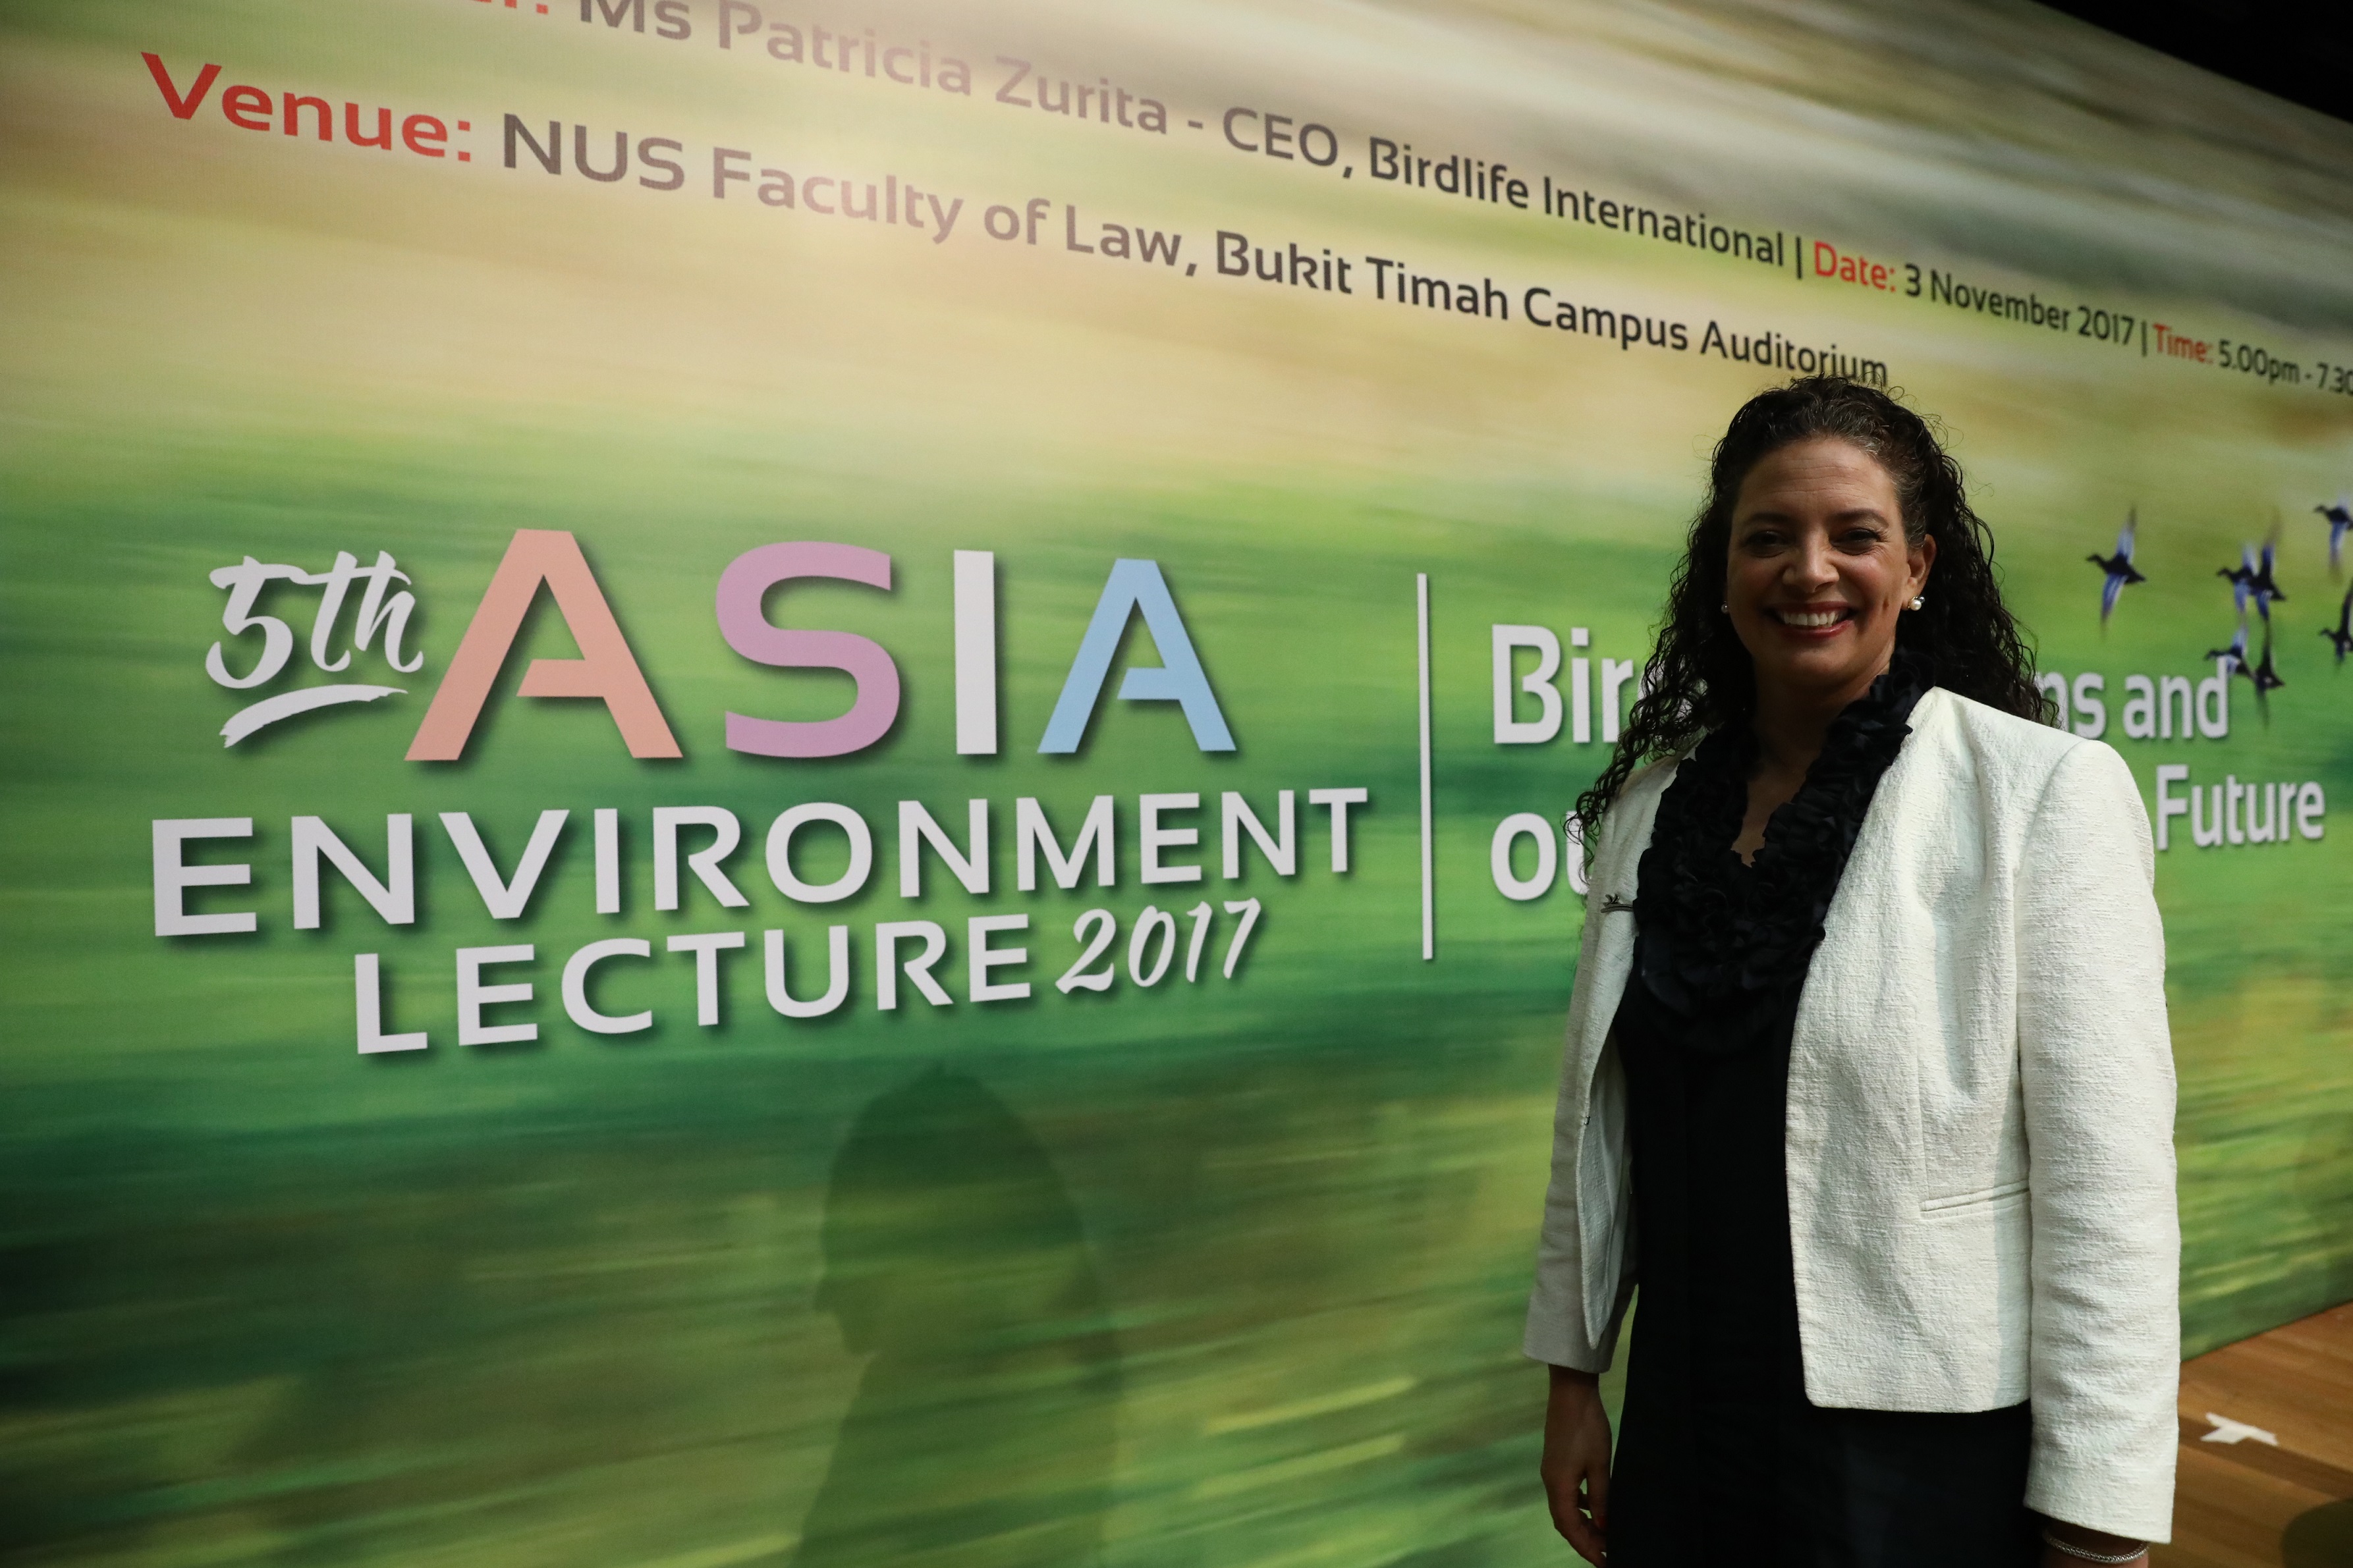 5th Asia Environment Lecture